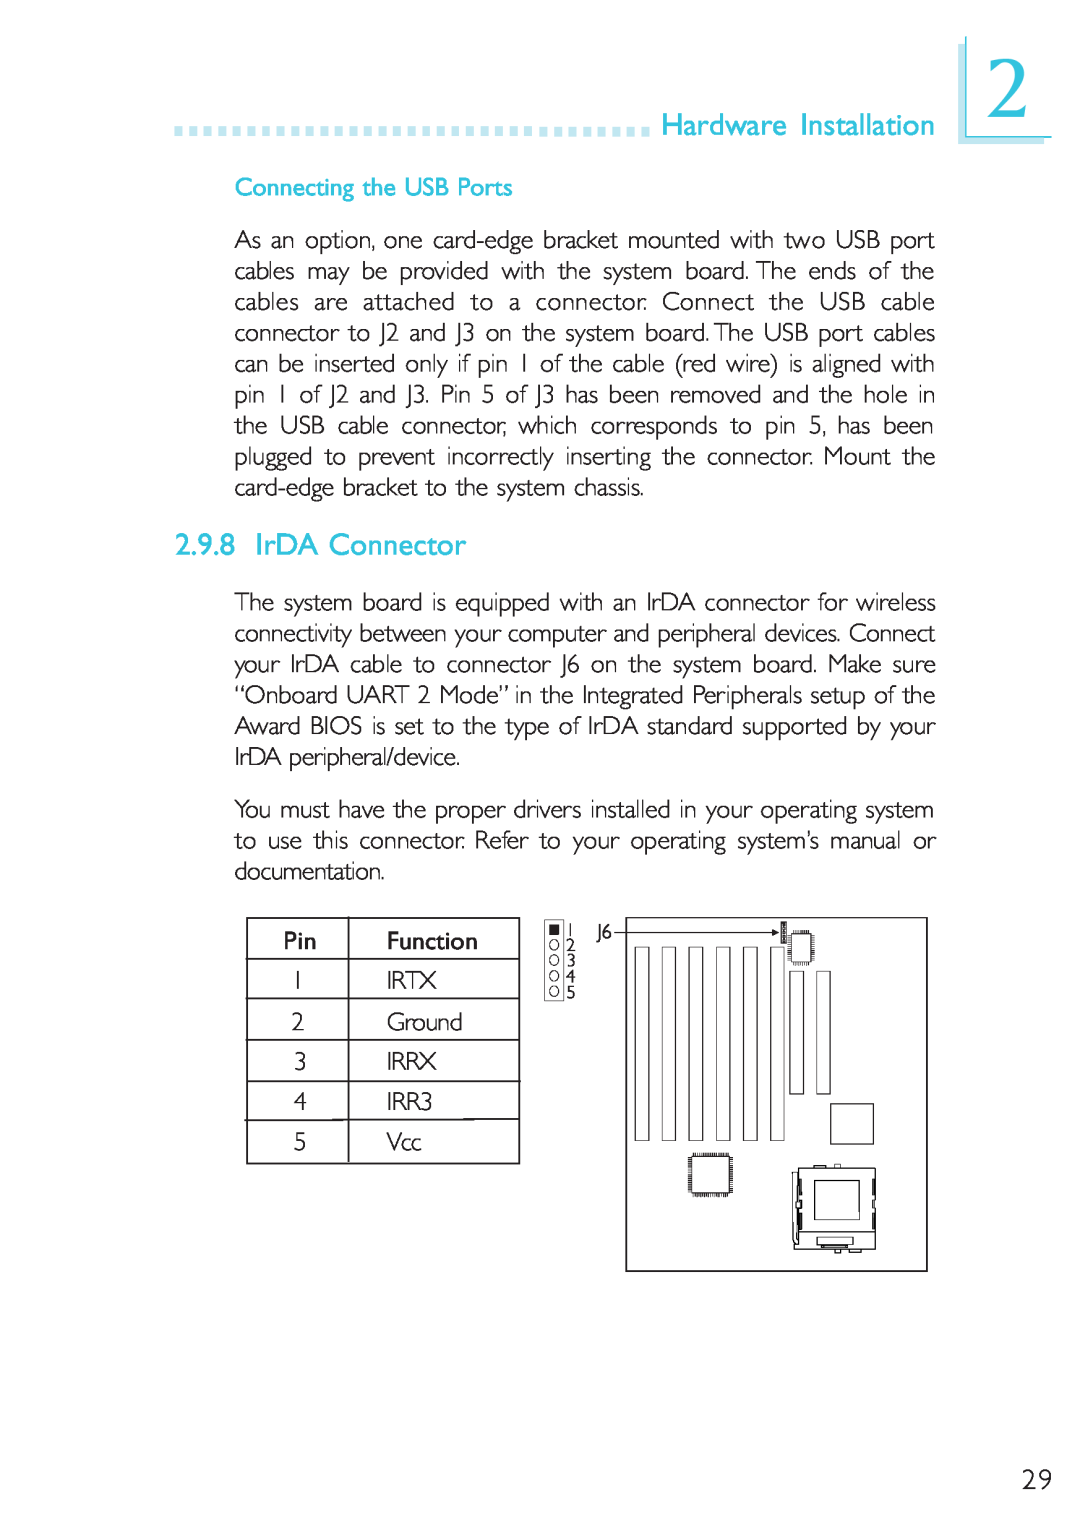 Microsoft G7VP2 manual IrDA Connector, Connecting the USB Ports, Hardware Installation 